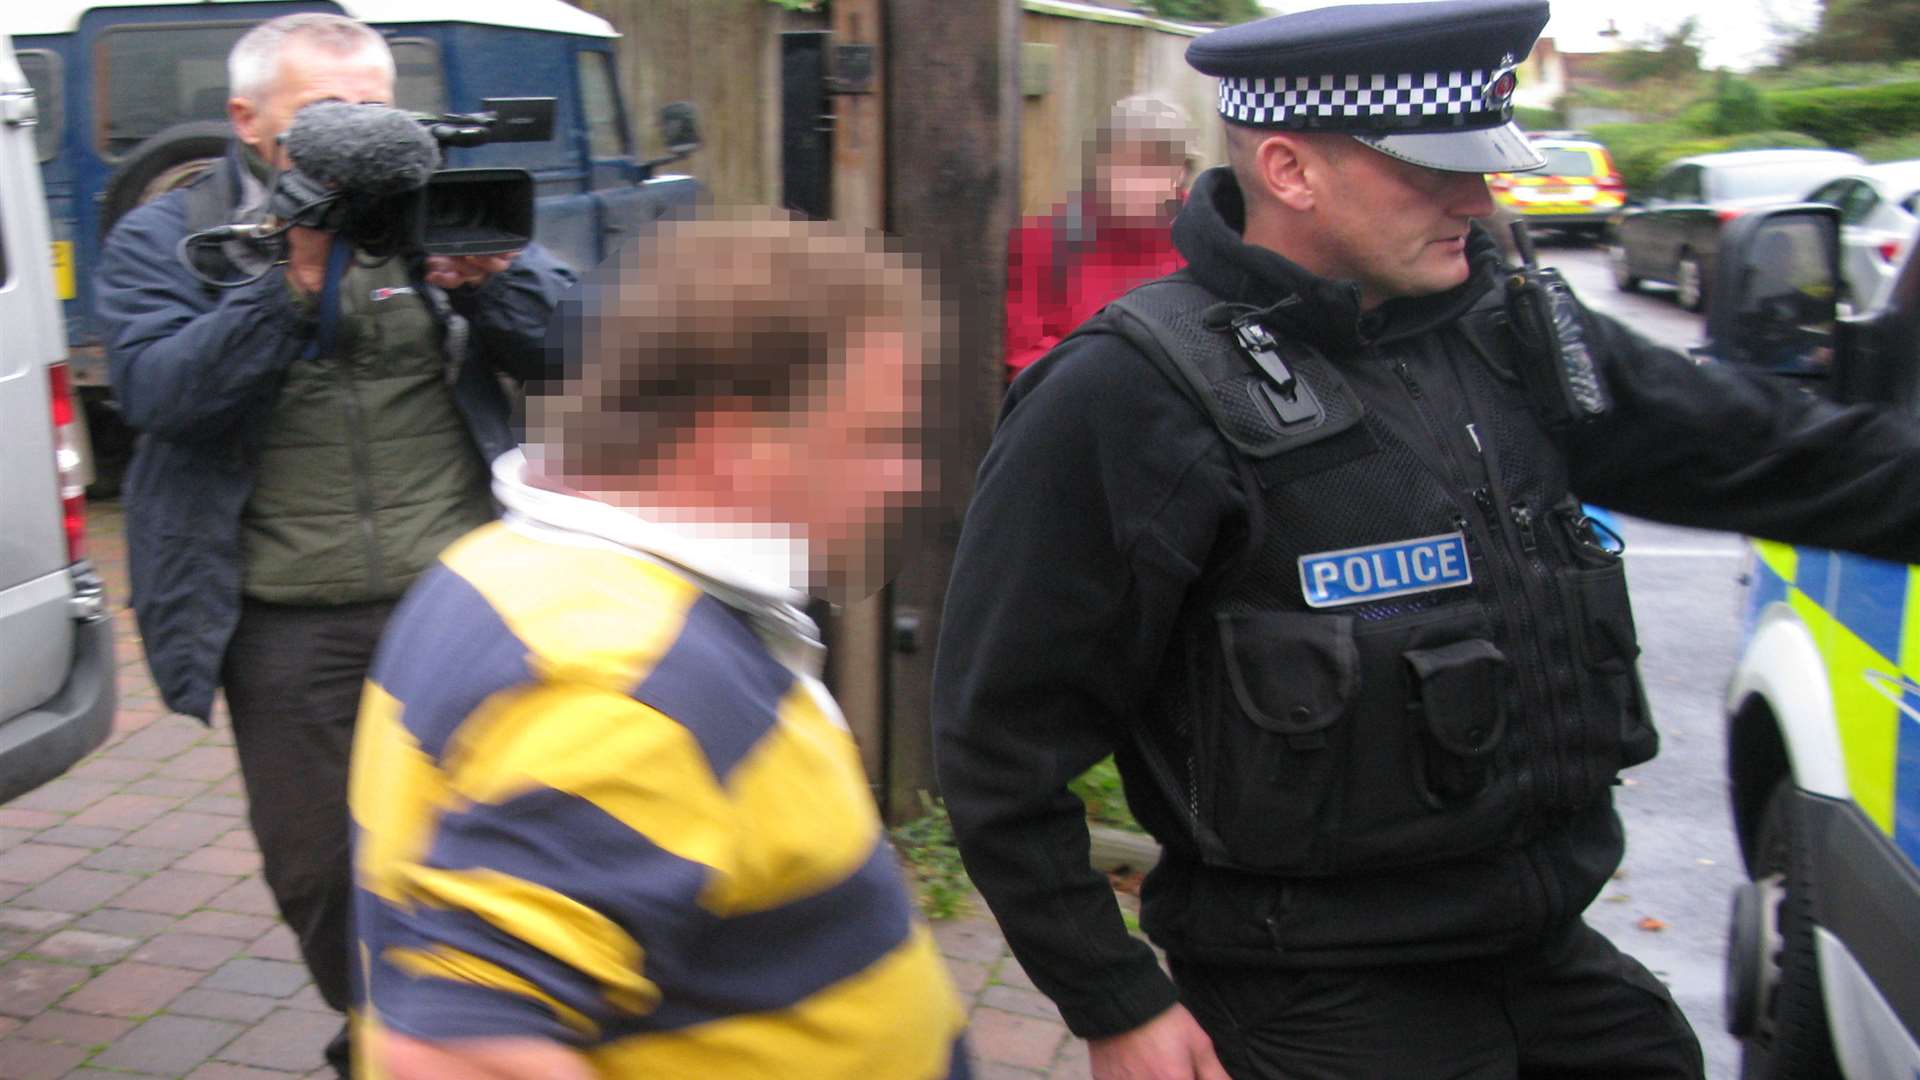 Darrell Houghton is arrested on suspicion of human trafficking under the full glare of cameras